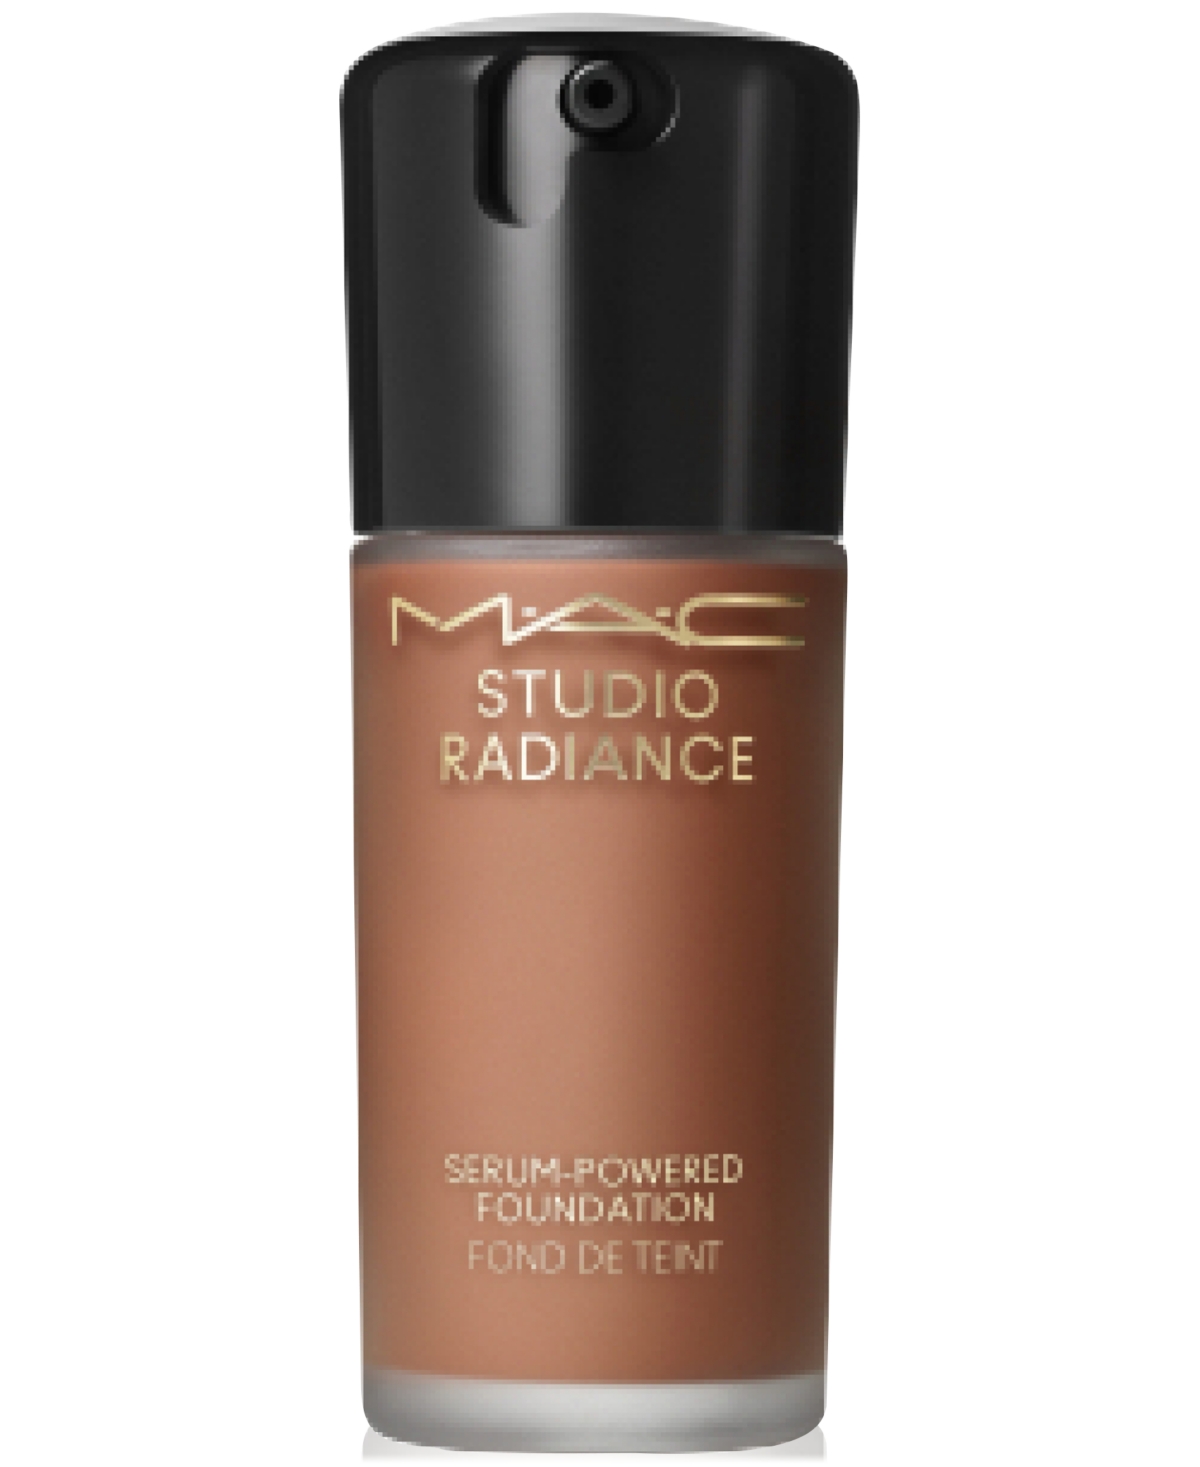 Mac Studio Radiance Serum-powered Foundation In Nw (rich Mahogany With Neutral Undertone